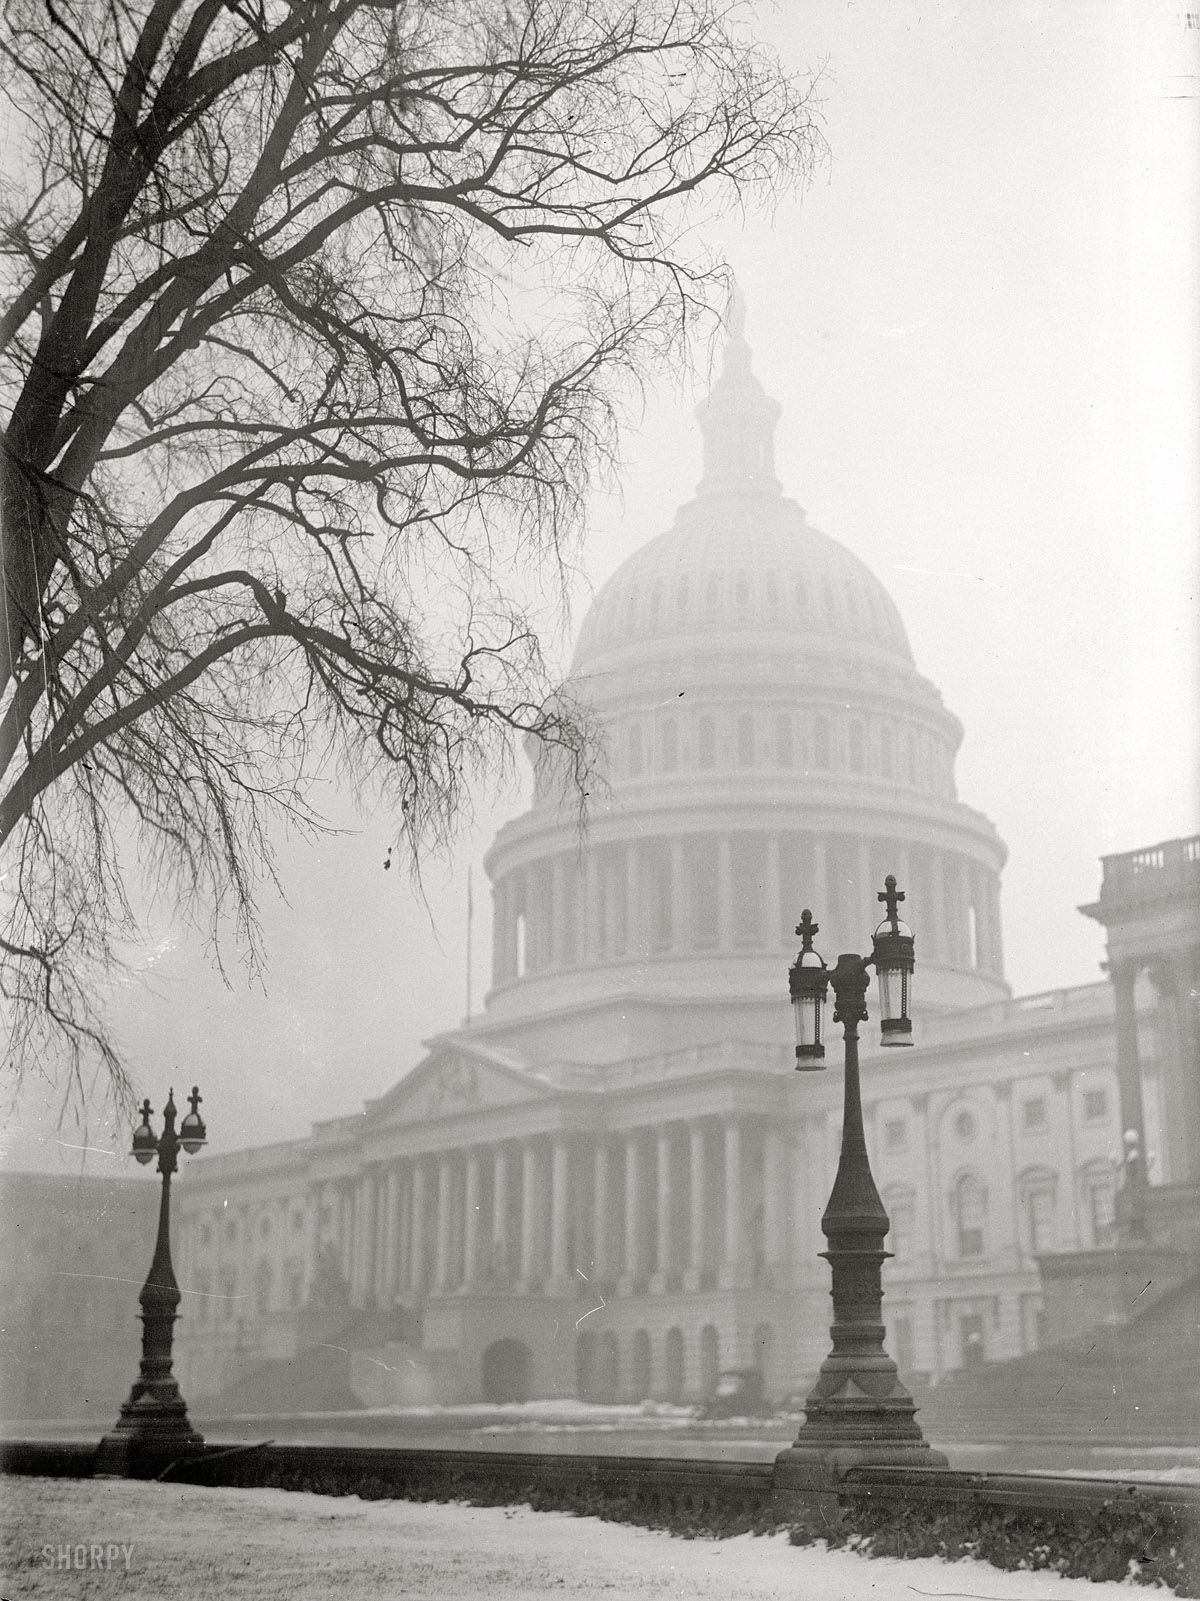 1917. The Capitol in the snow. Harris & Ewing glass negative. View full size.